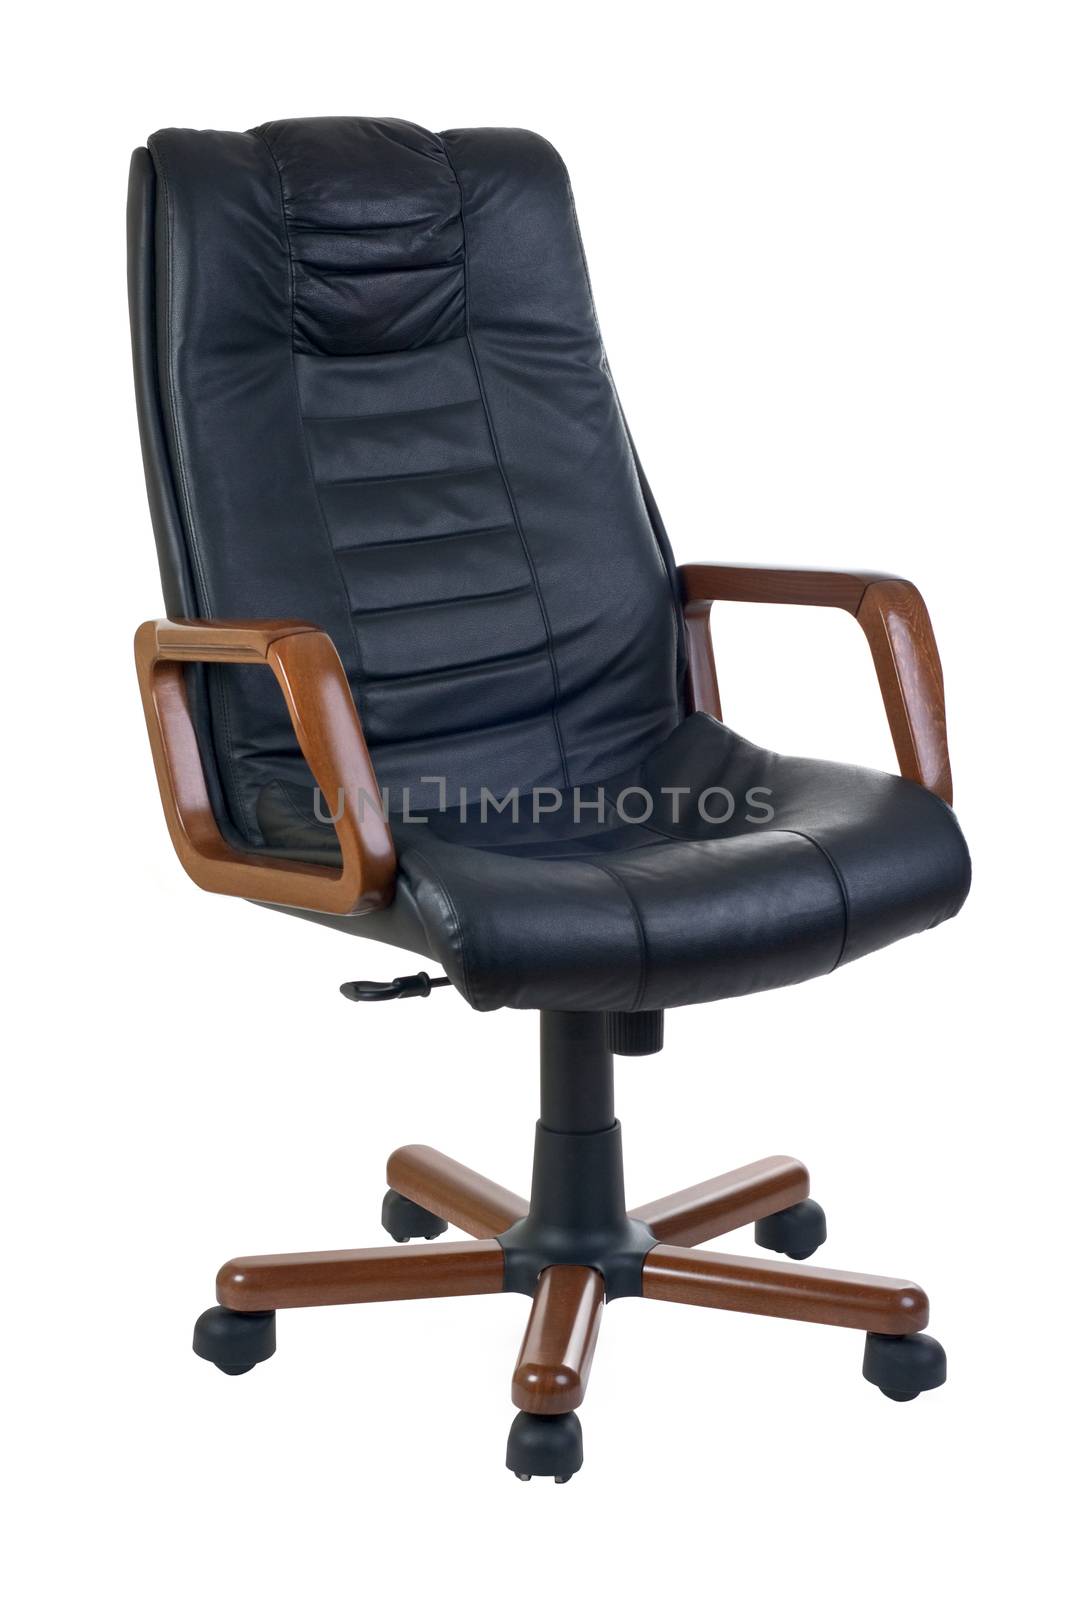 Expensive office armchair of leather and wood for executive or boss isolated on white with clipping path